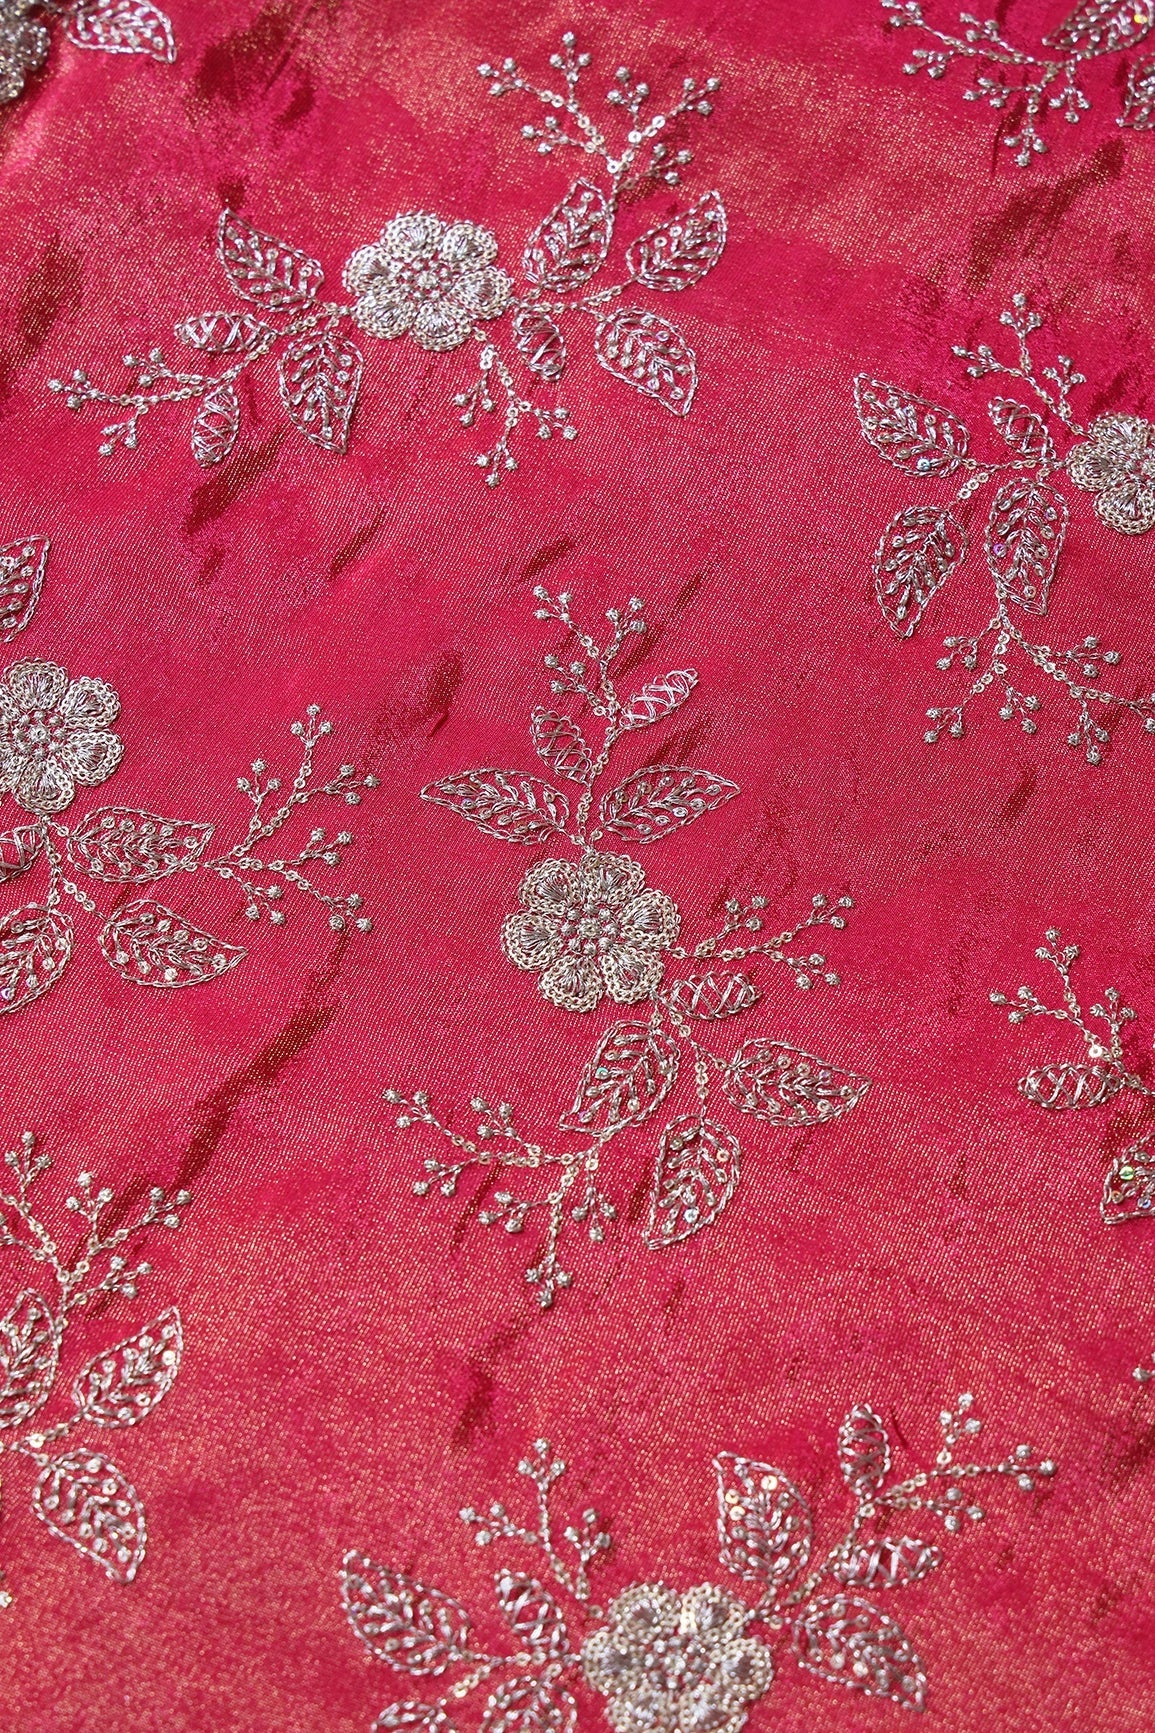 Gold Sequins And Zari Floral Embroidery Work On Cerise Pink Pure Viscose Zari Tissue Fabric - doeraa